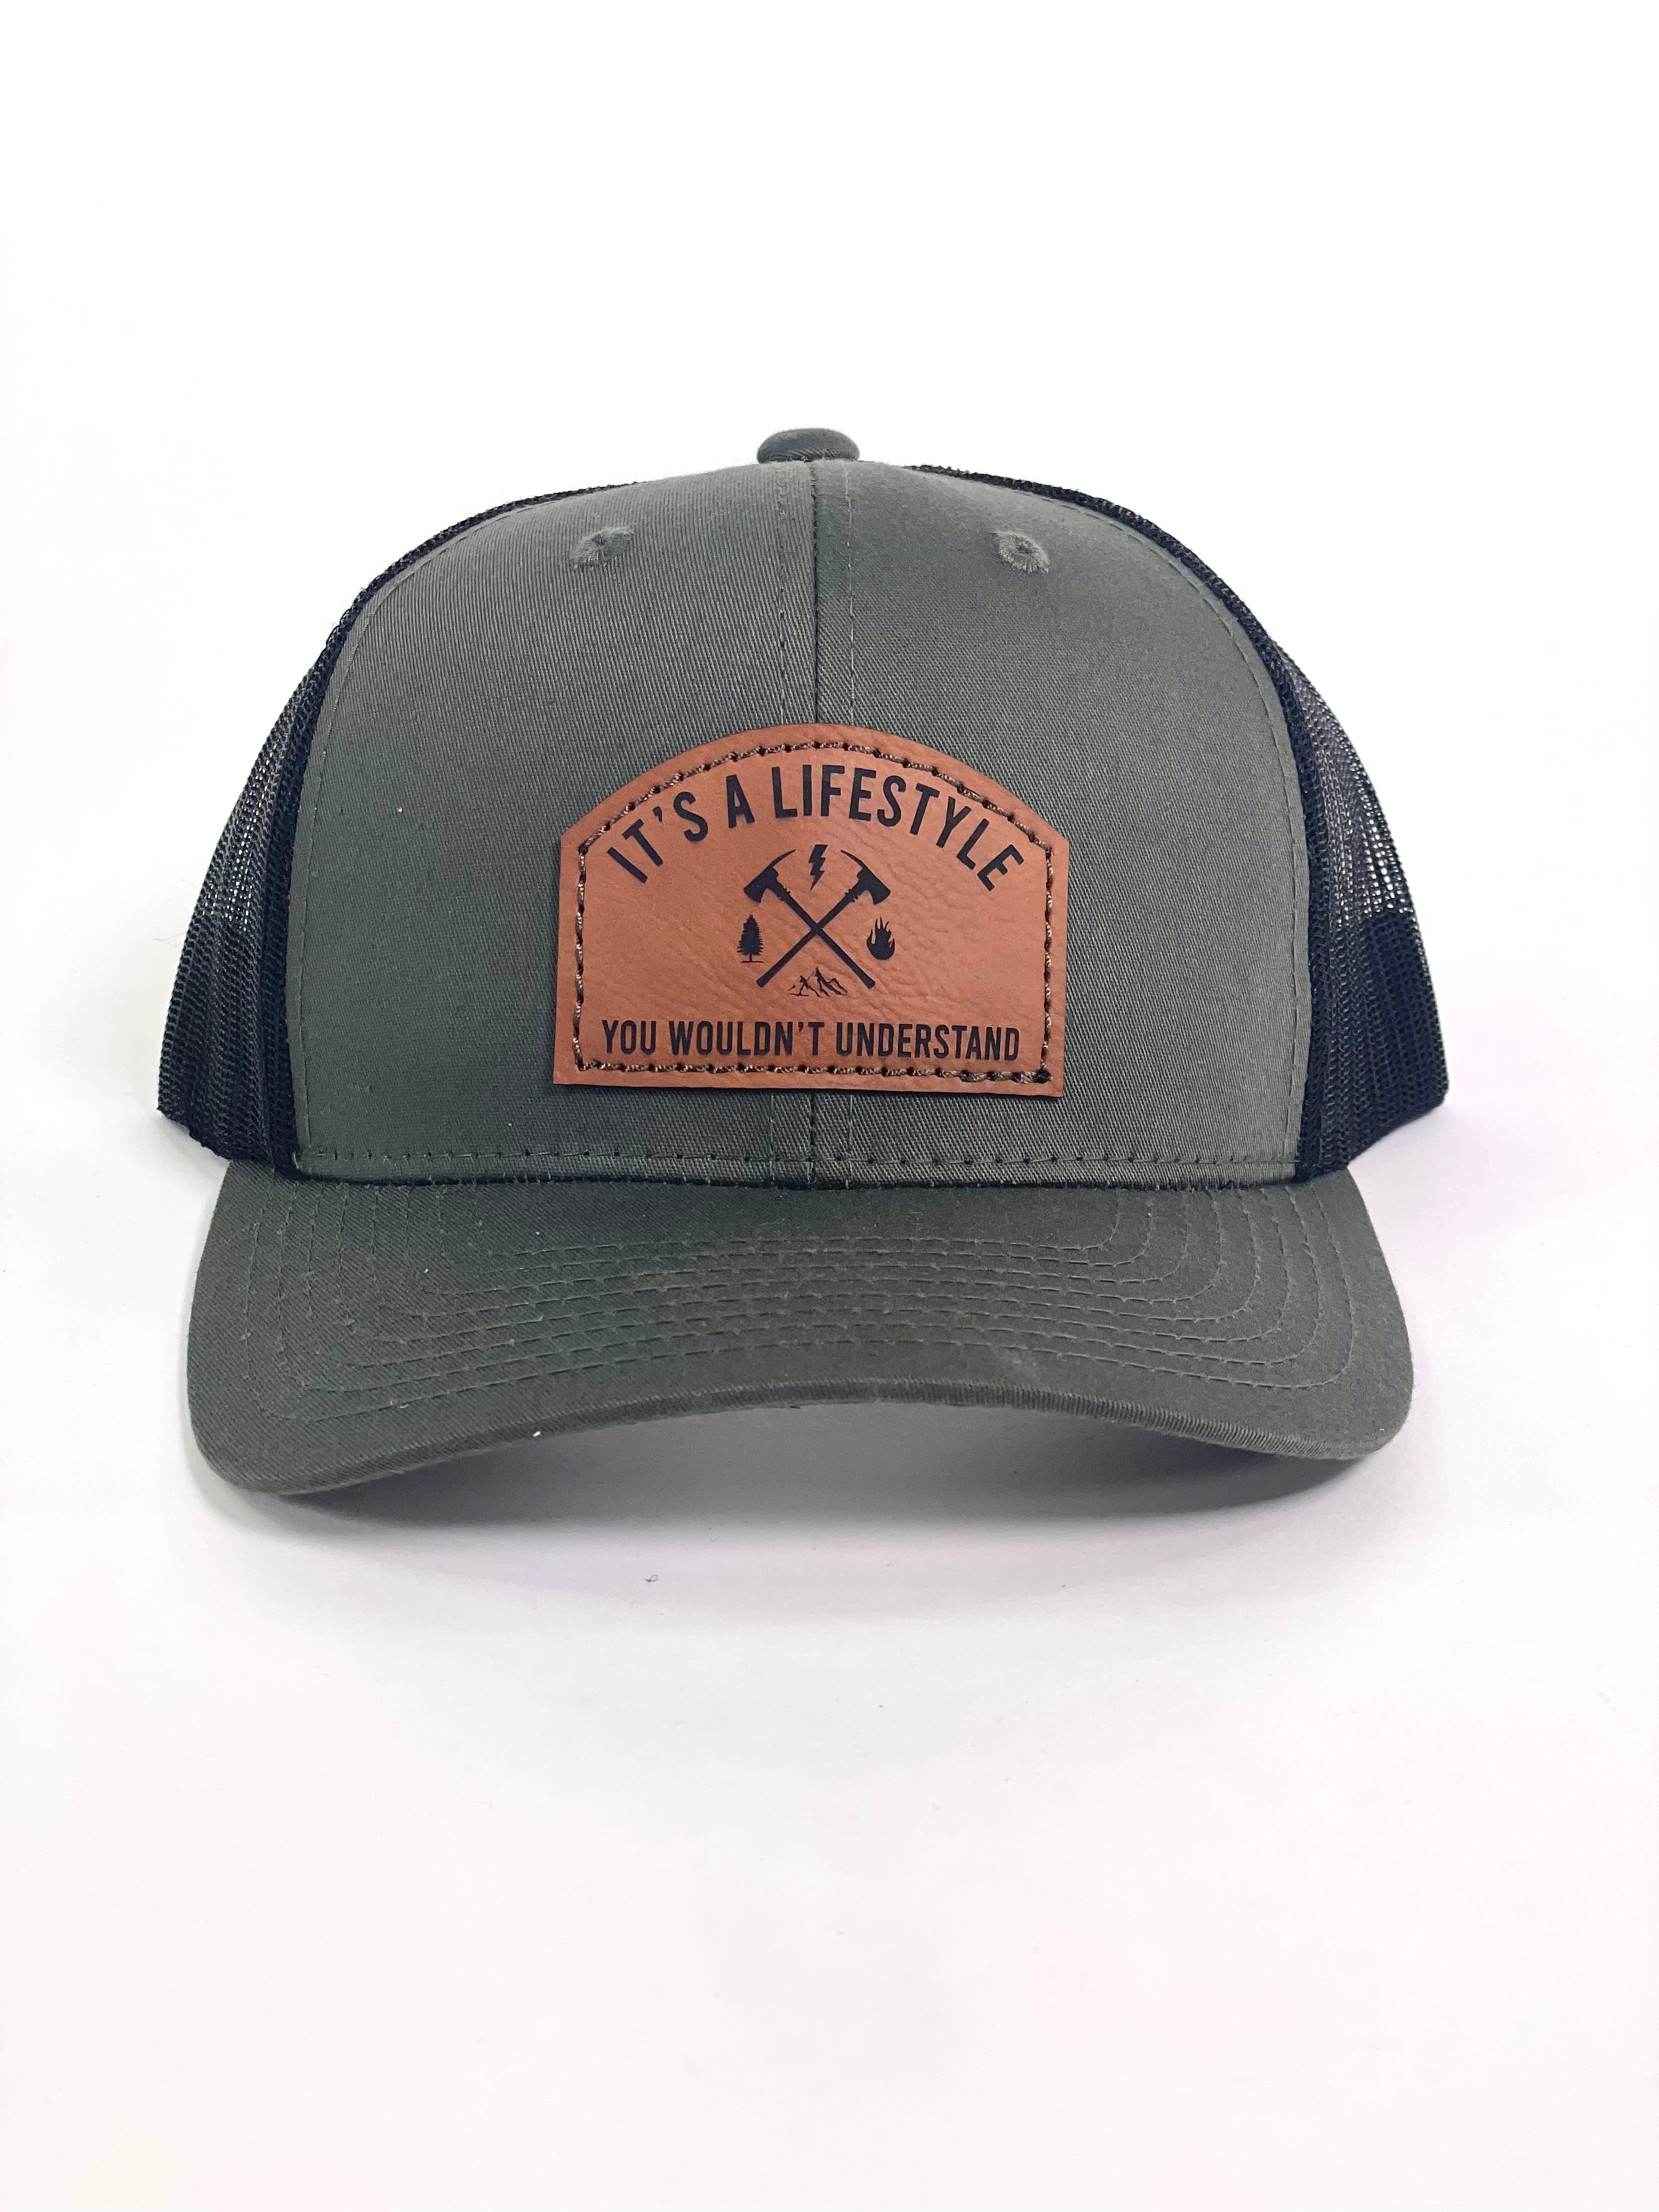 LIFESTYLE LEATHER PATCH HATS – Hotshot Coffee Roasters